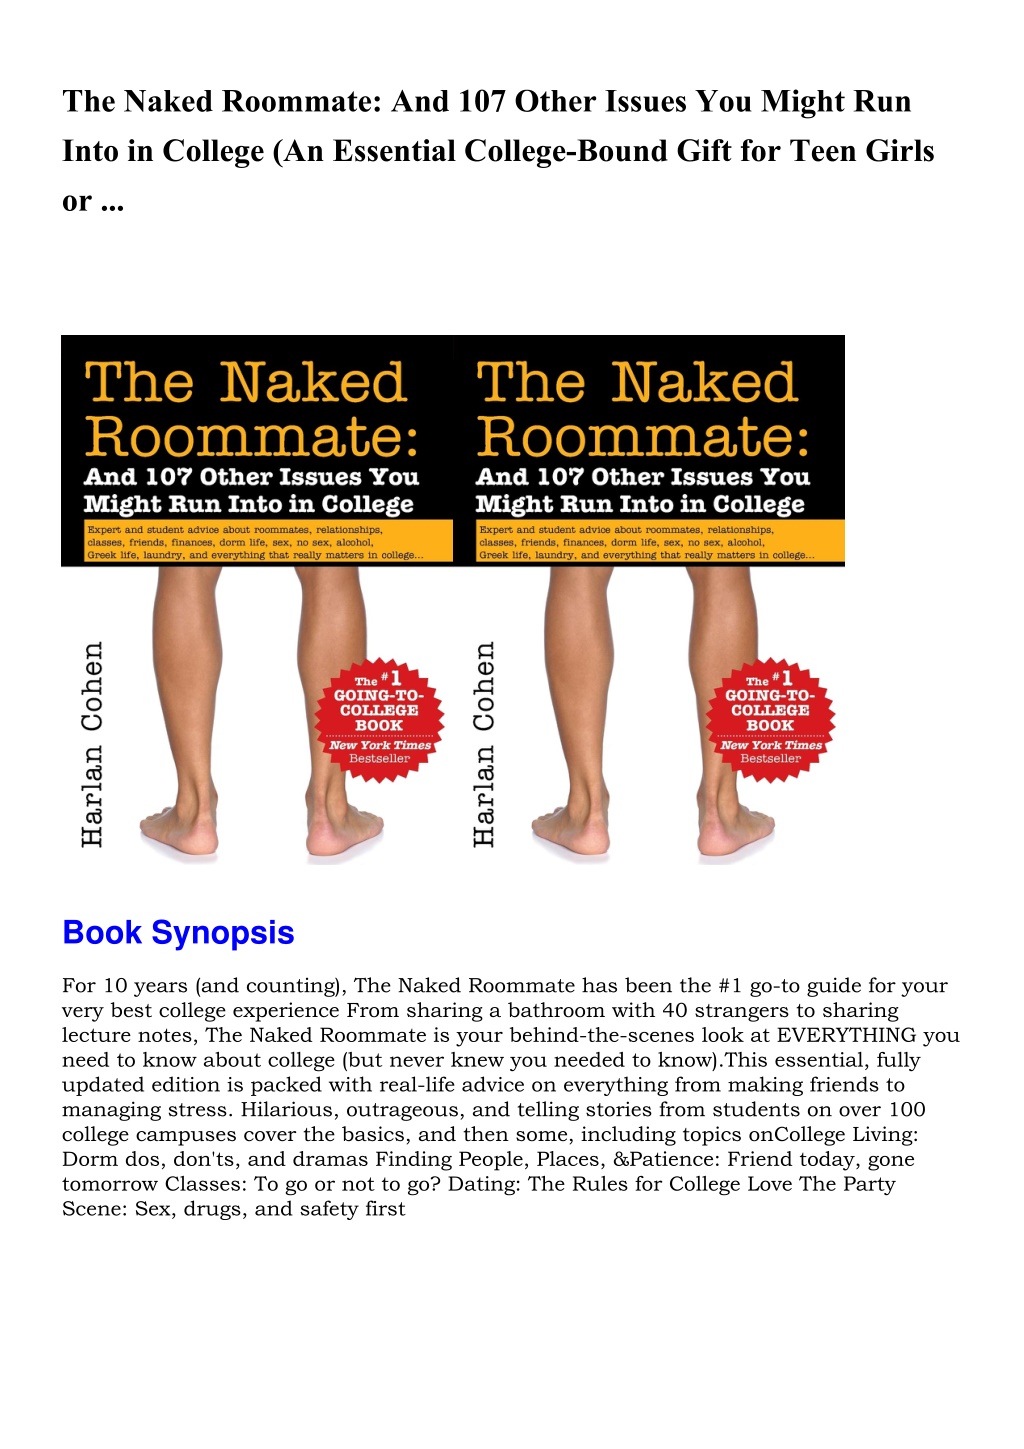 PPT READ The Naked Roommate And Other Issues You Might Run Into In College An PowerPoint